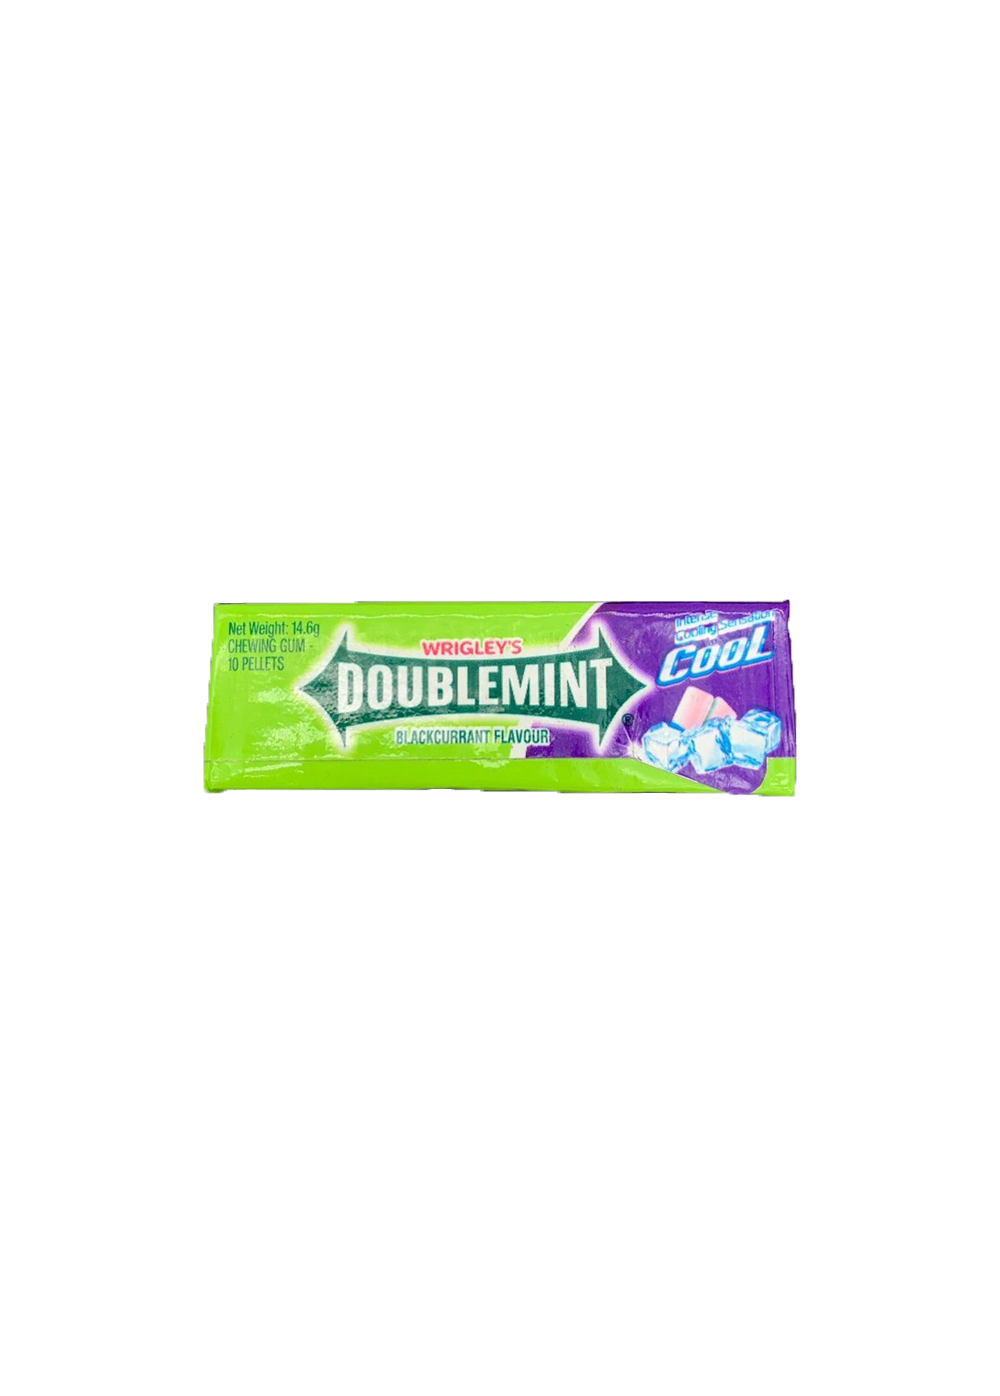 Wrigley's Doublemint Chewing Gum Blackcurrant Flavour 14.6g